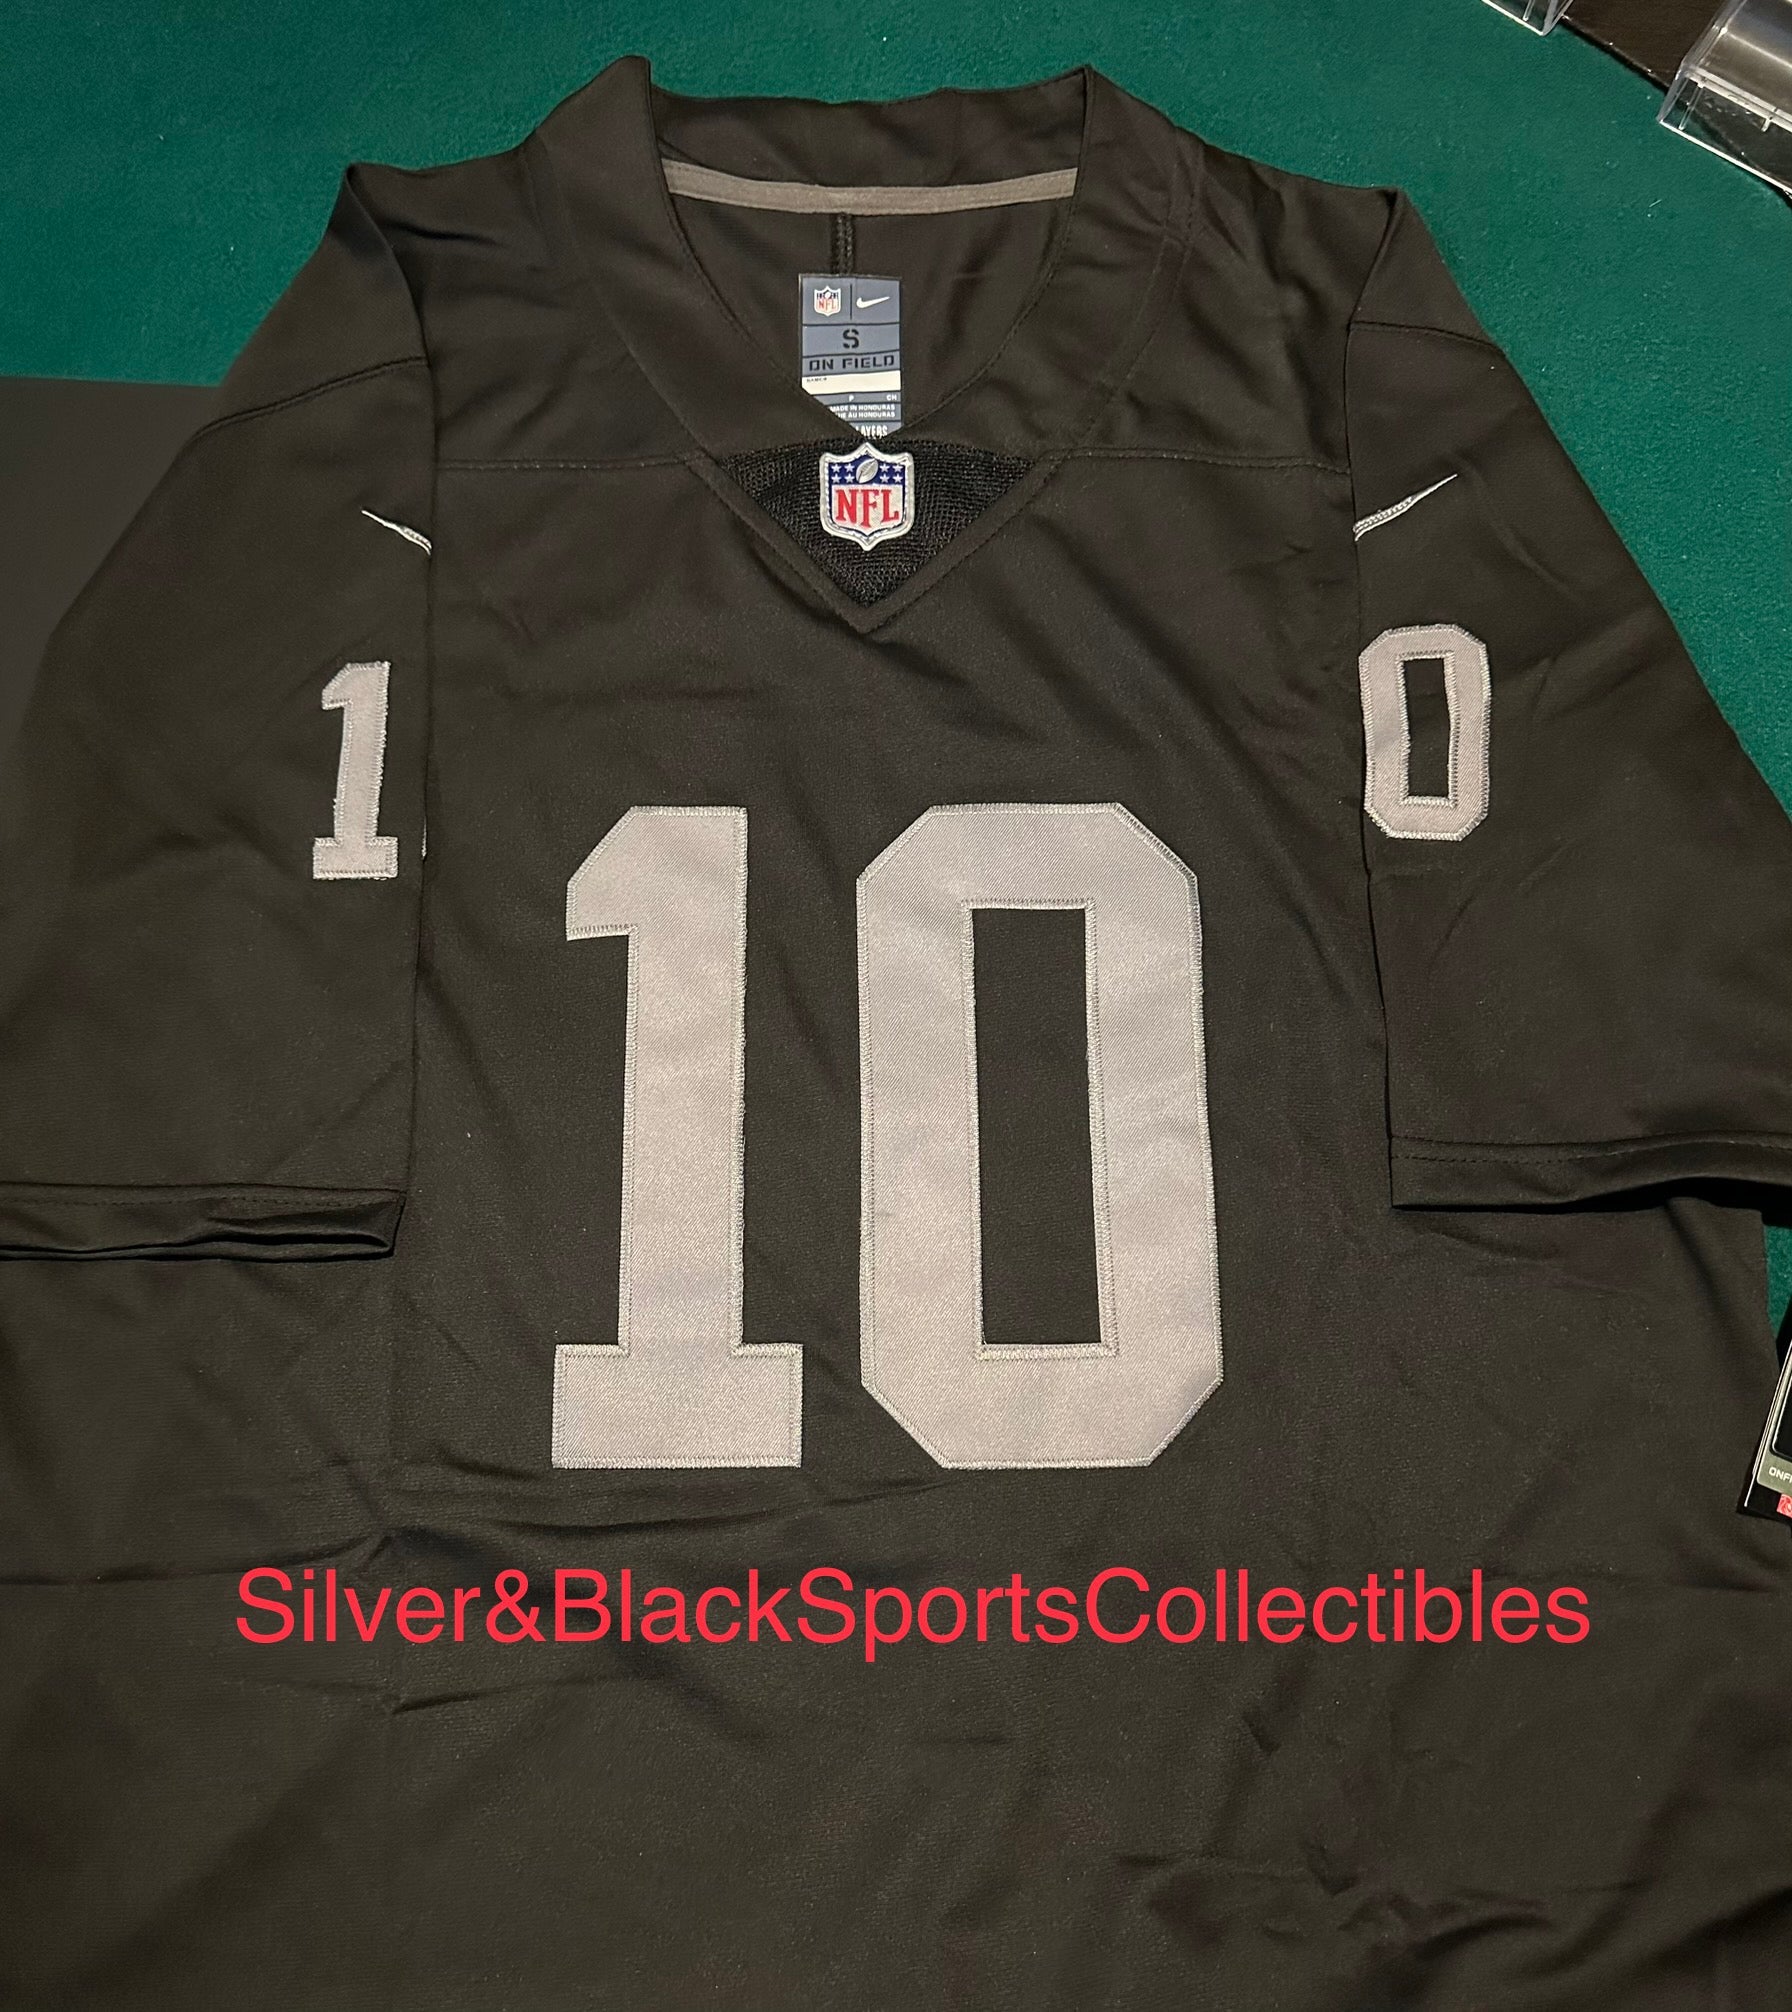 Upgrade Your Game with Stitched NFL Jersey